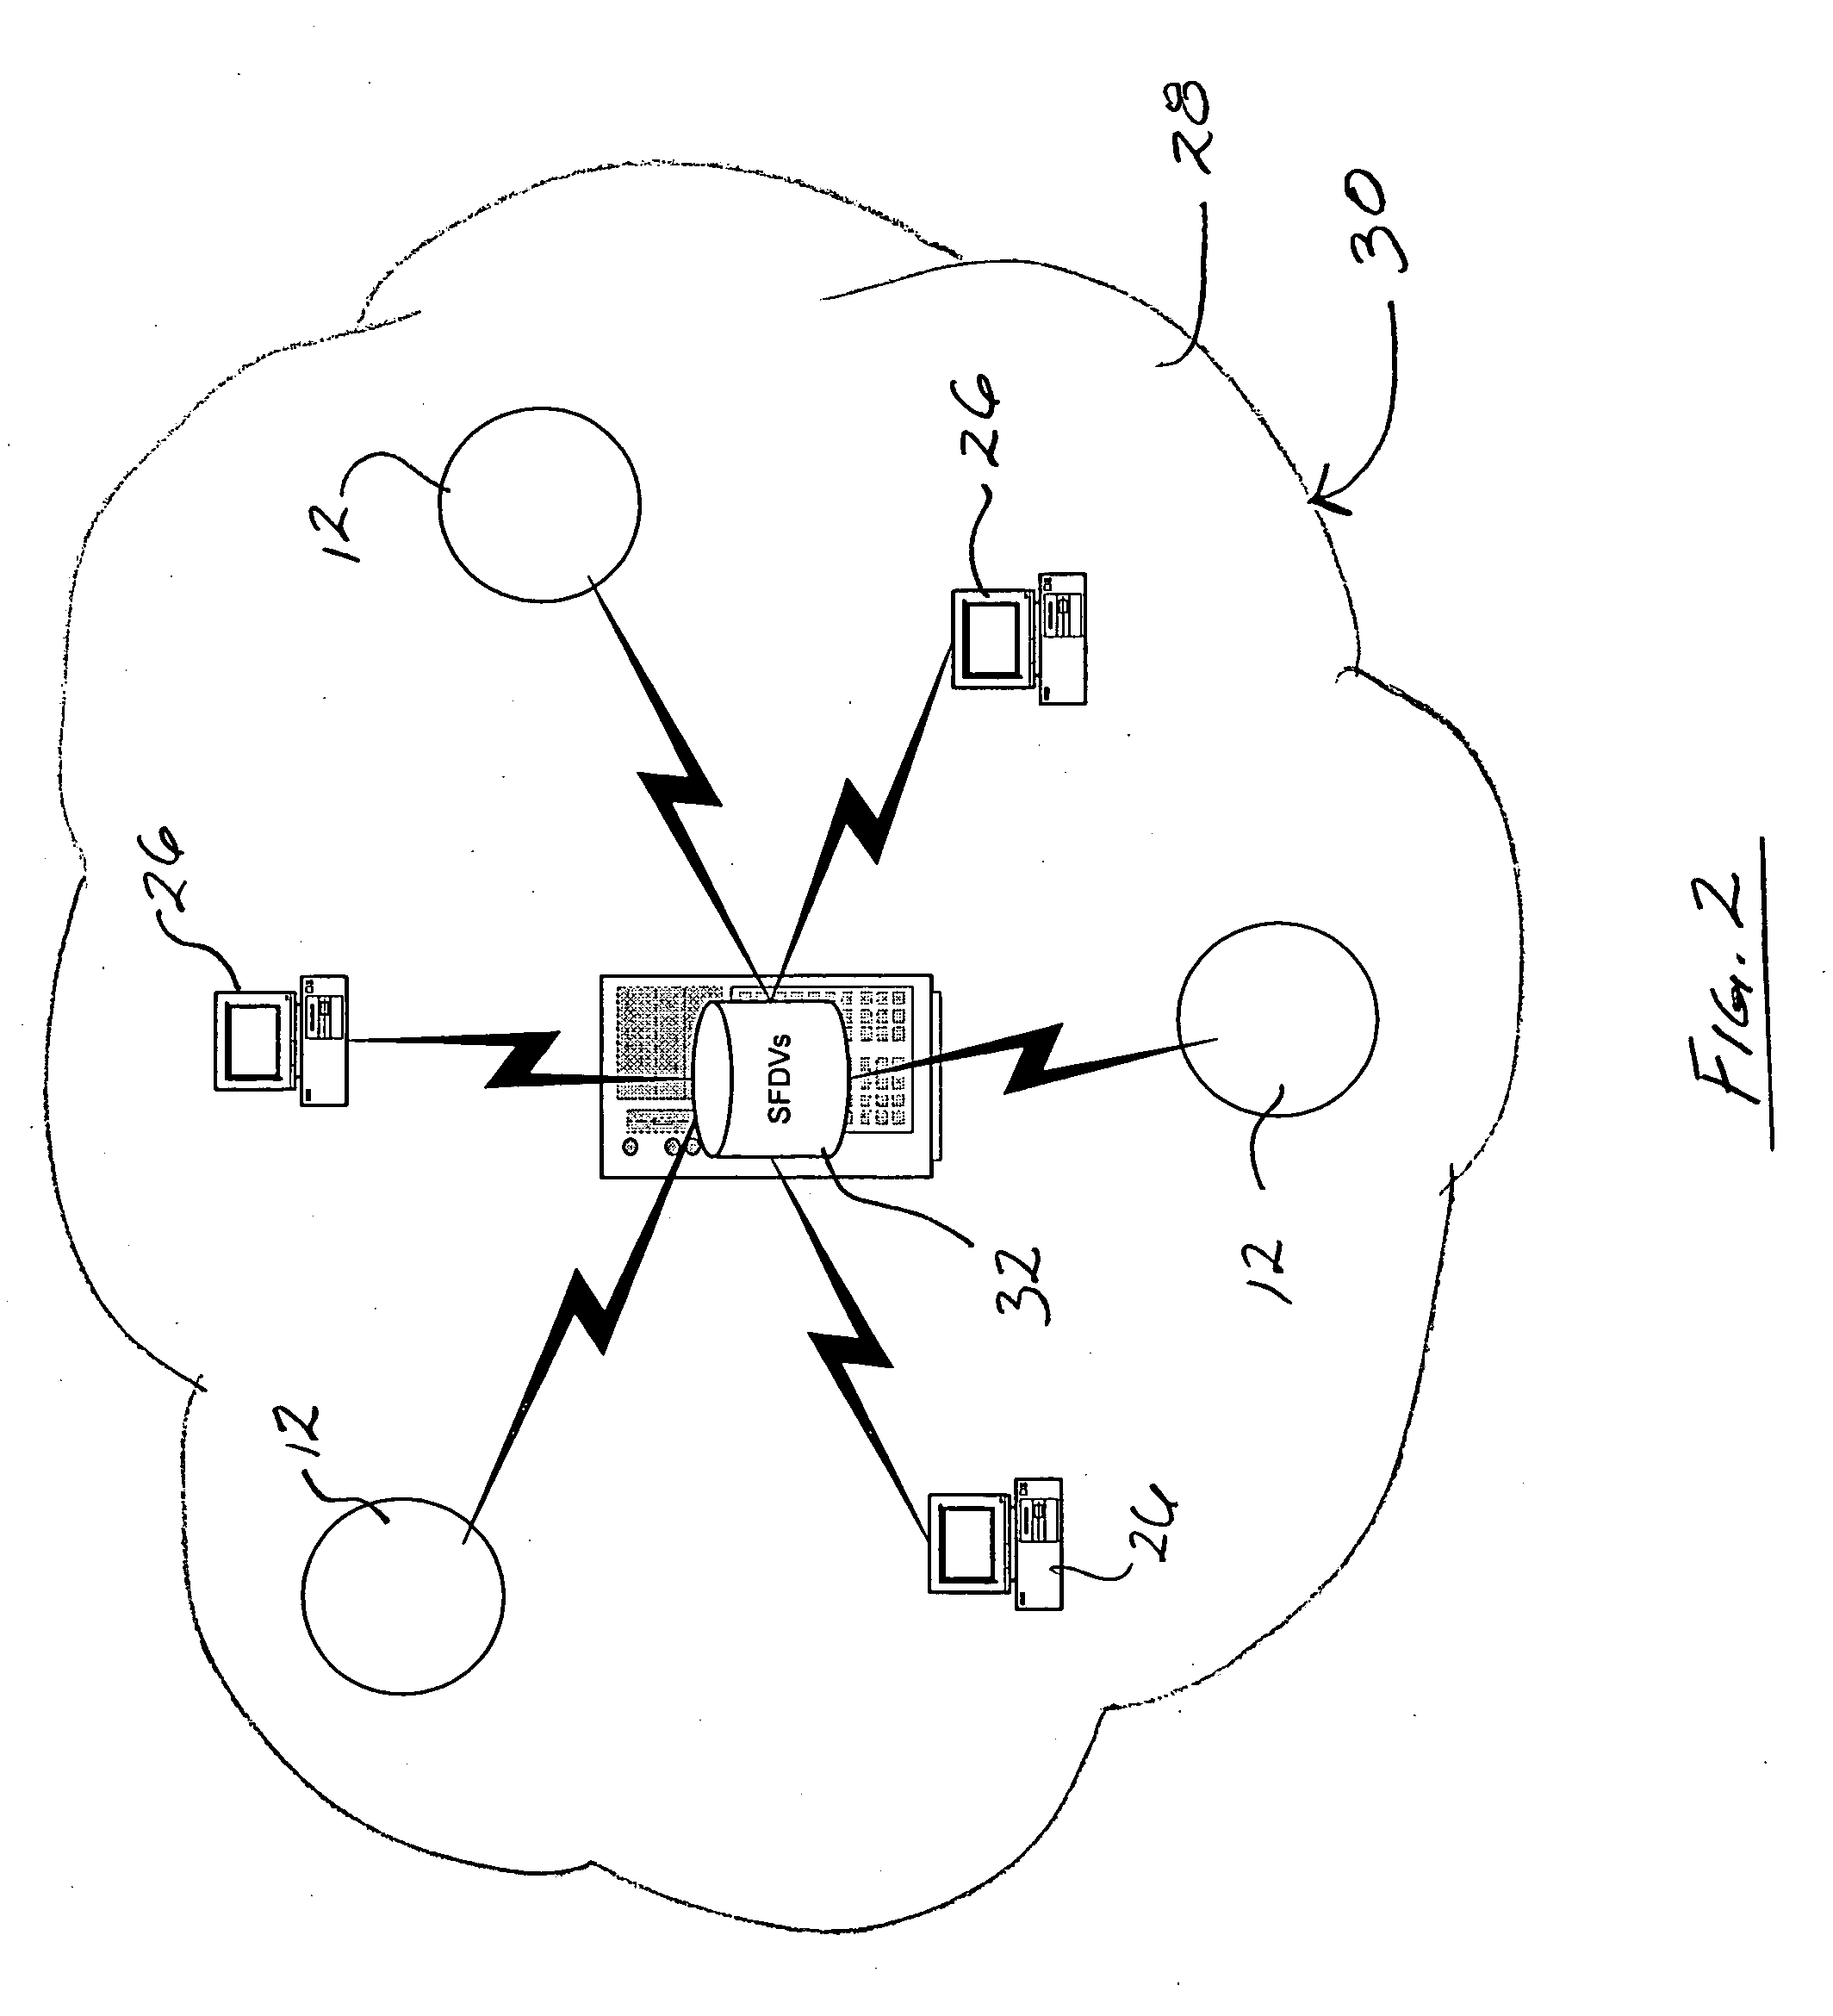 Fleet data reporting and benchmarking system and method